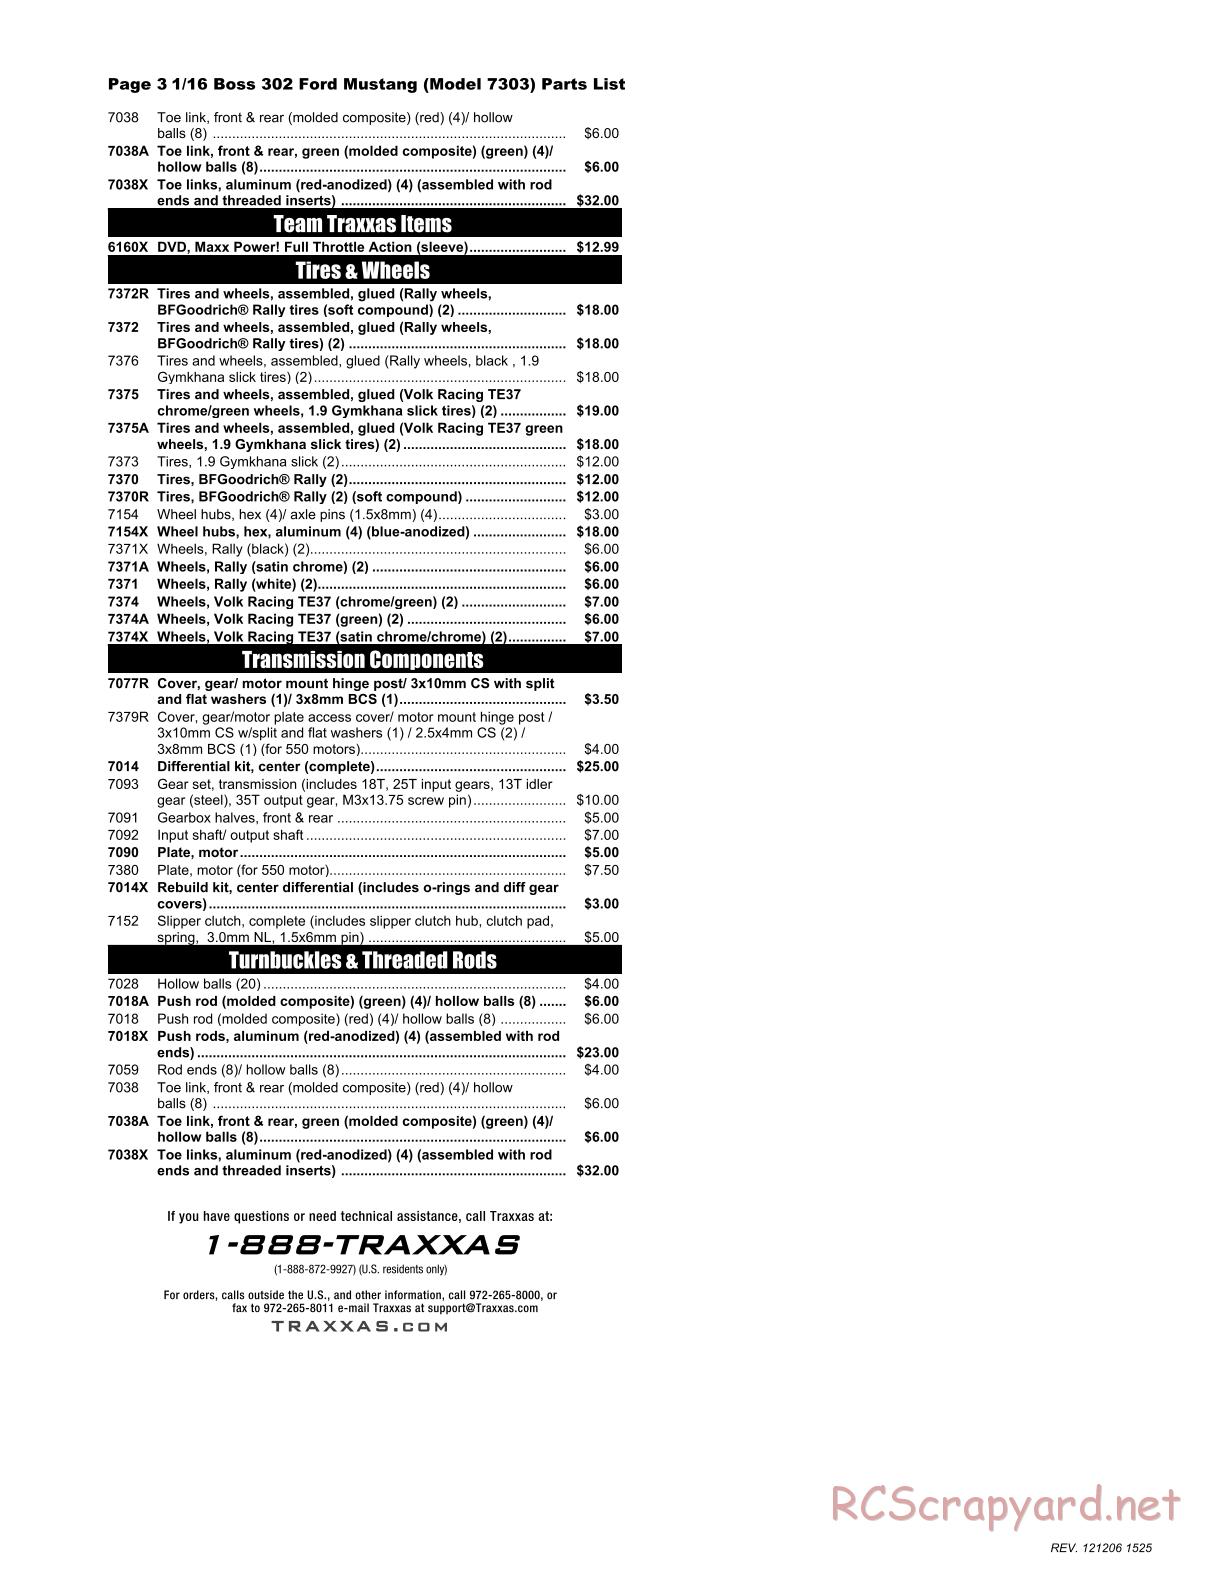 Traxxas - 1/16 Ford Mustang Boss 302 (2011) - Parts List - Page 3